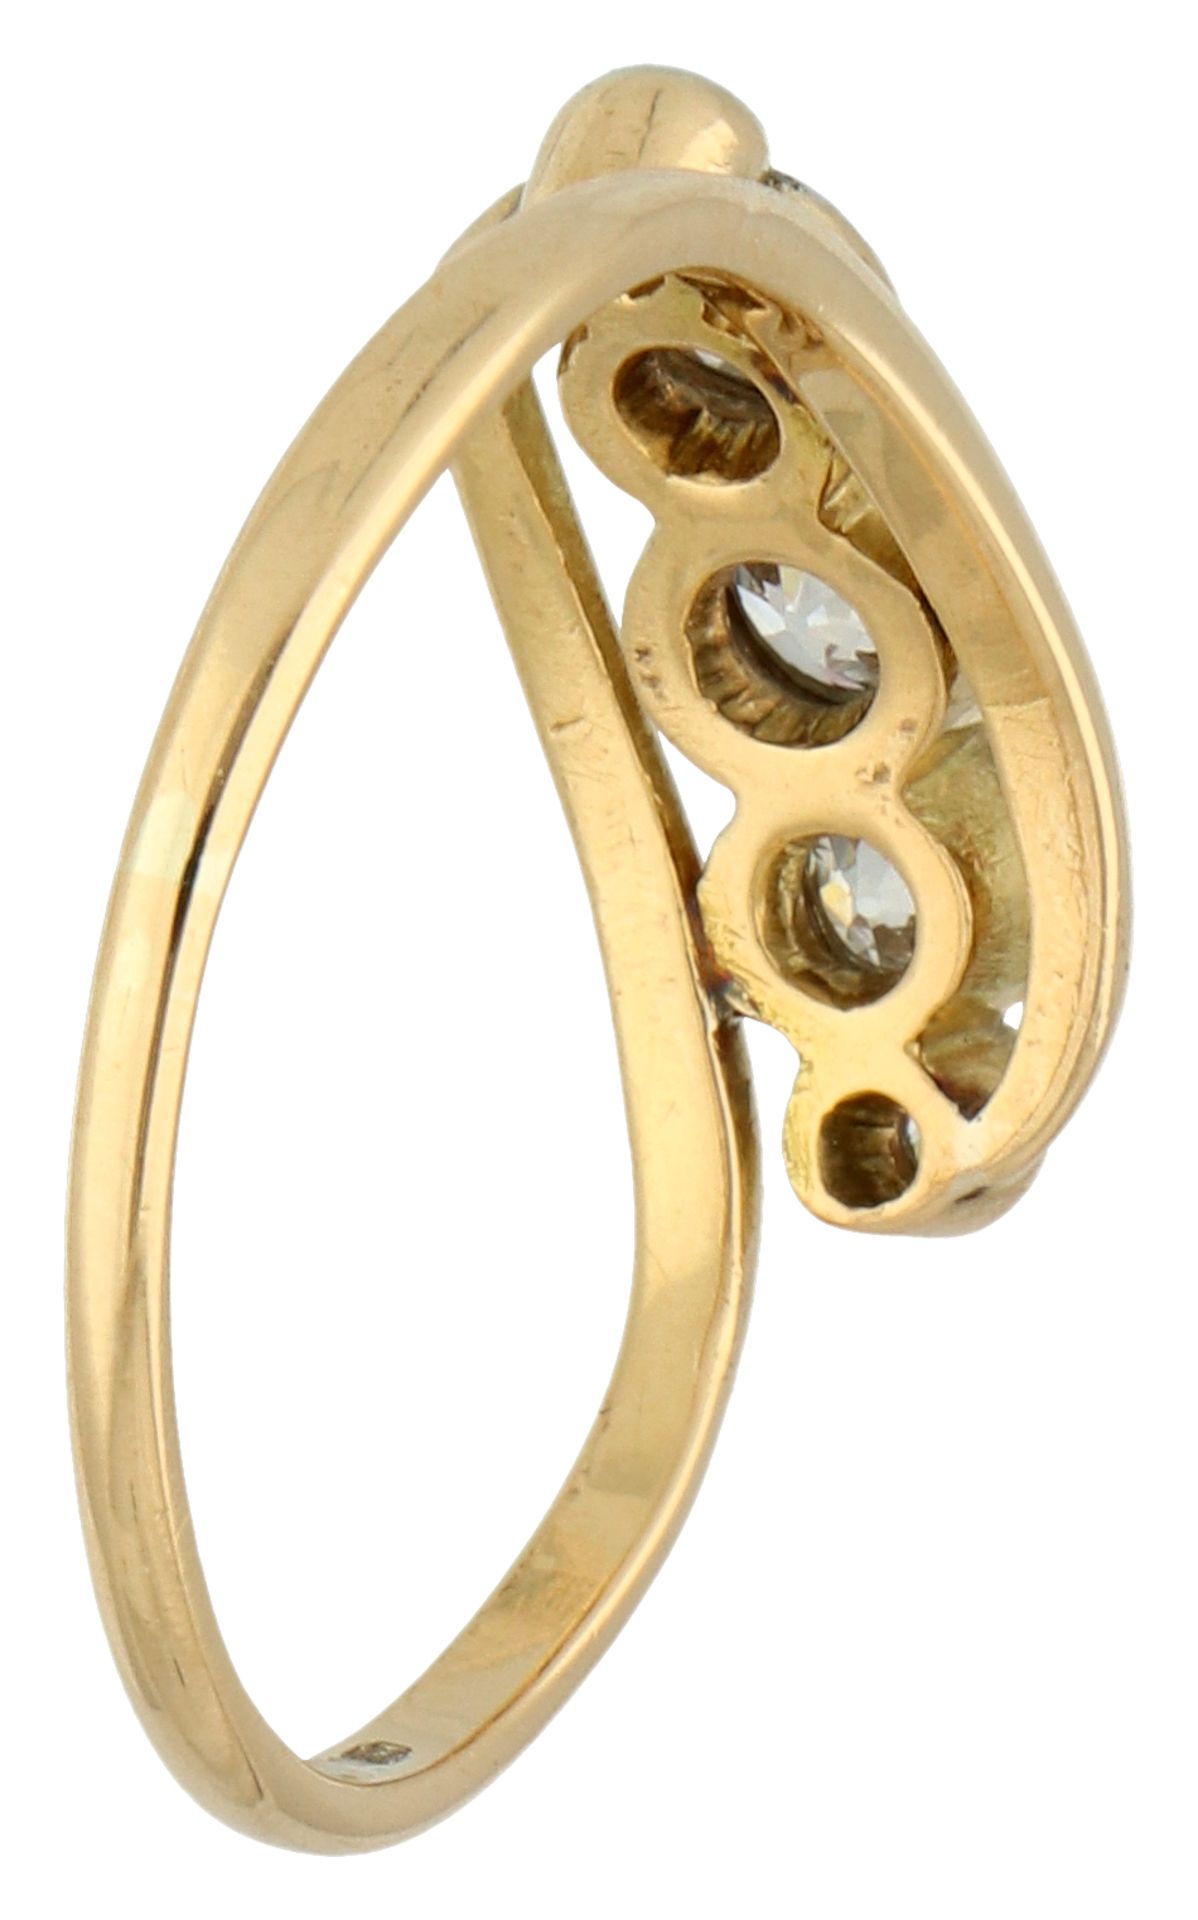 No reserve - 18K Yellow gold 5-stone ring set with approx. 0.25 ct. old European cut diamonds. - Image 2 of 2